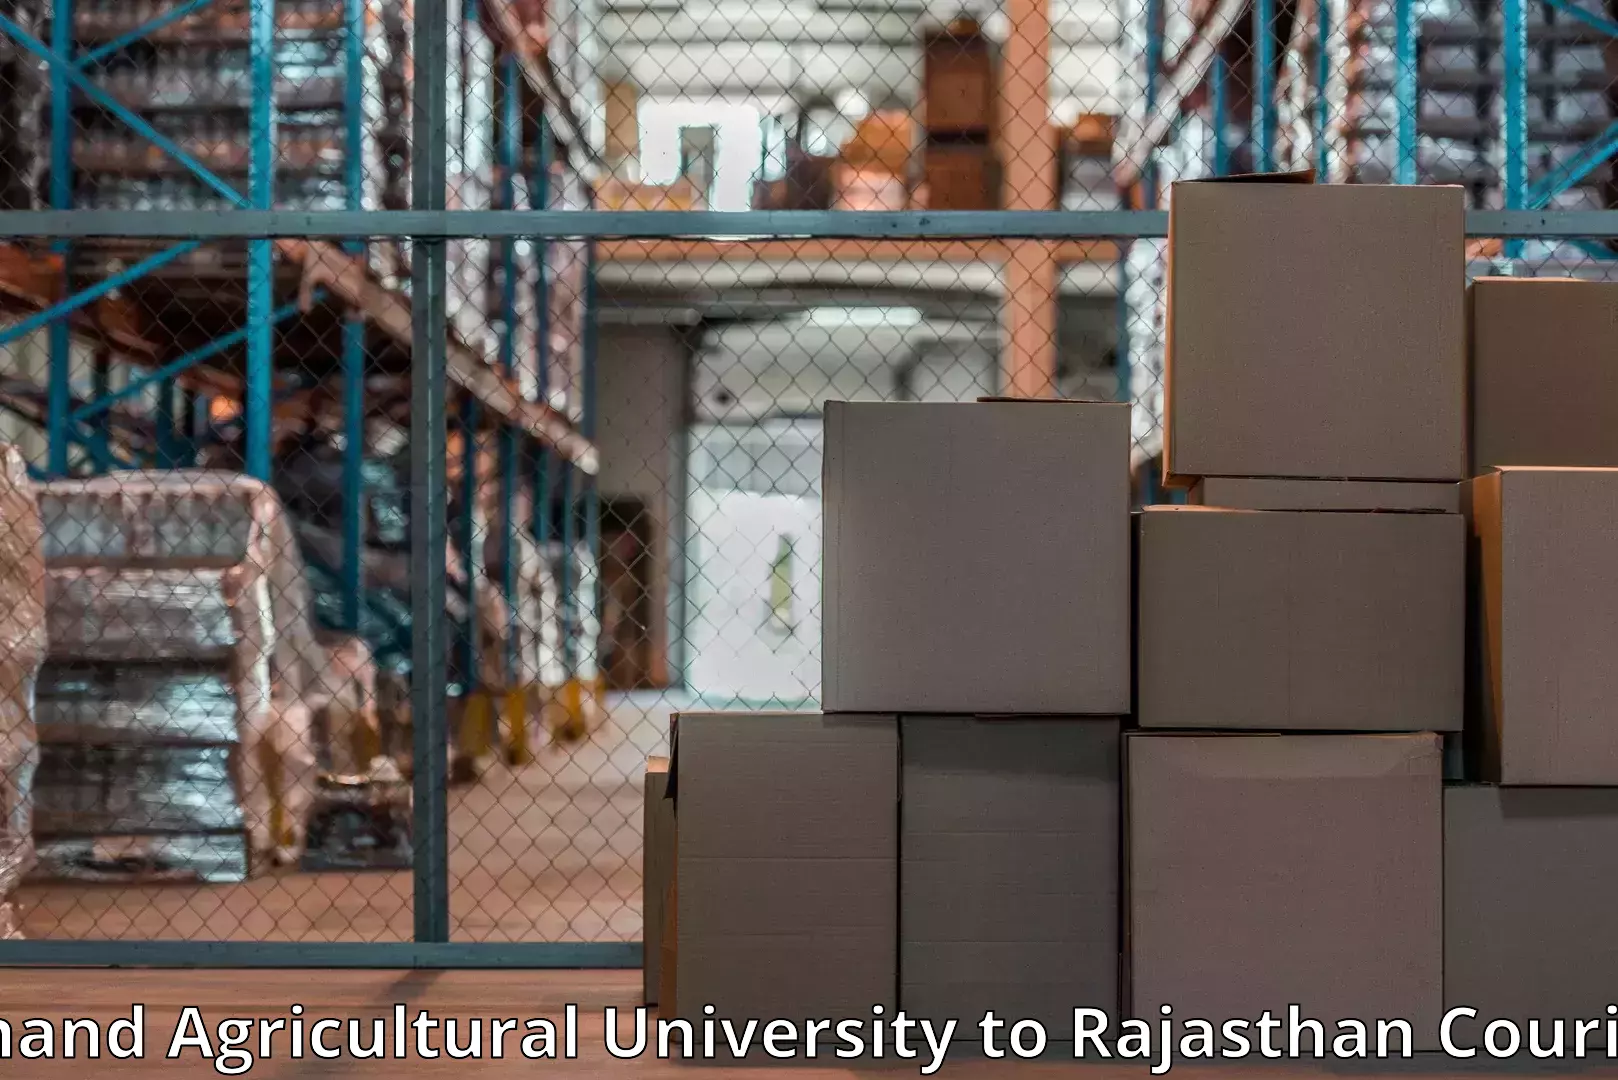 Furniture transport solutions in Anand Agricultural University to Shahpura Jaipur